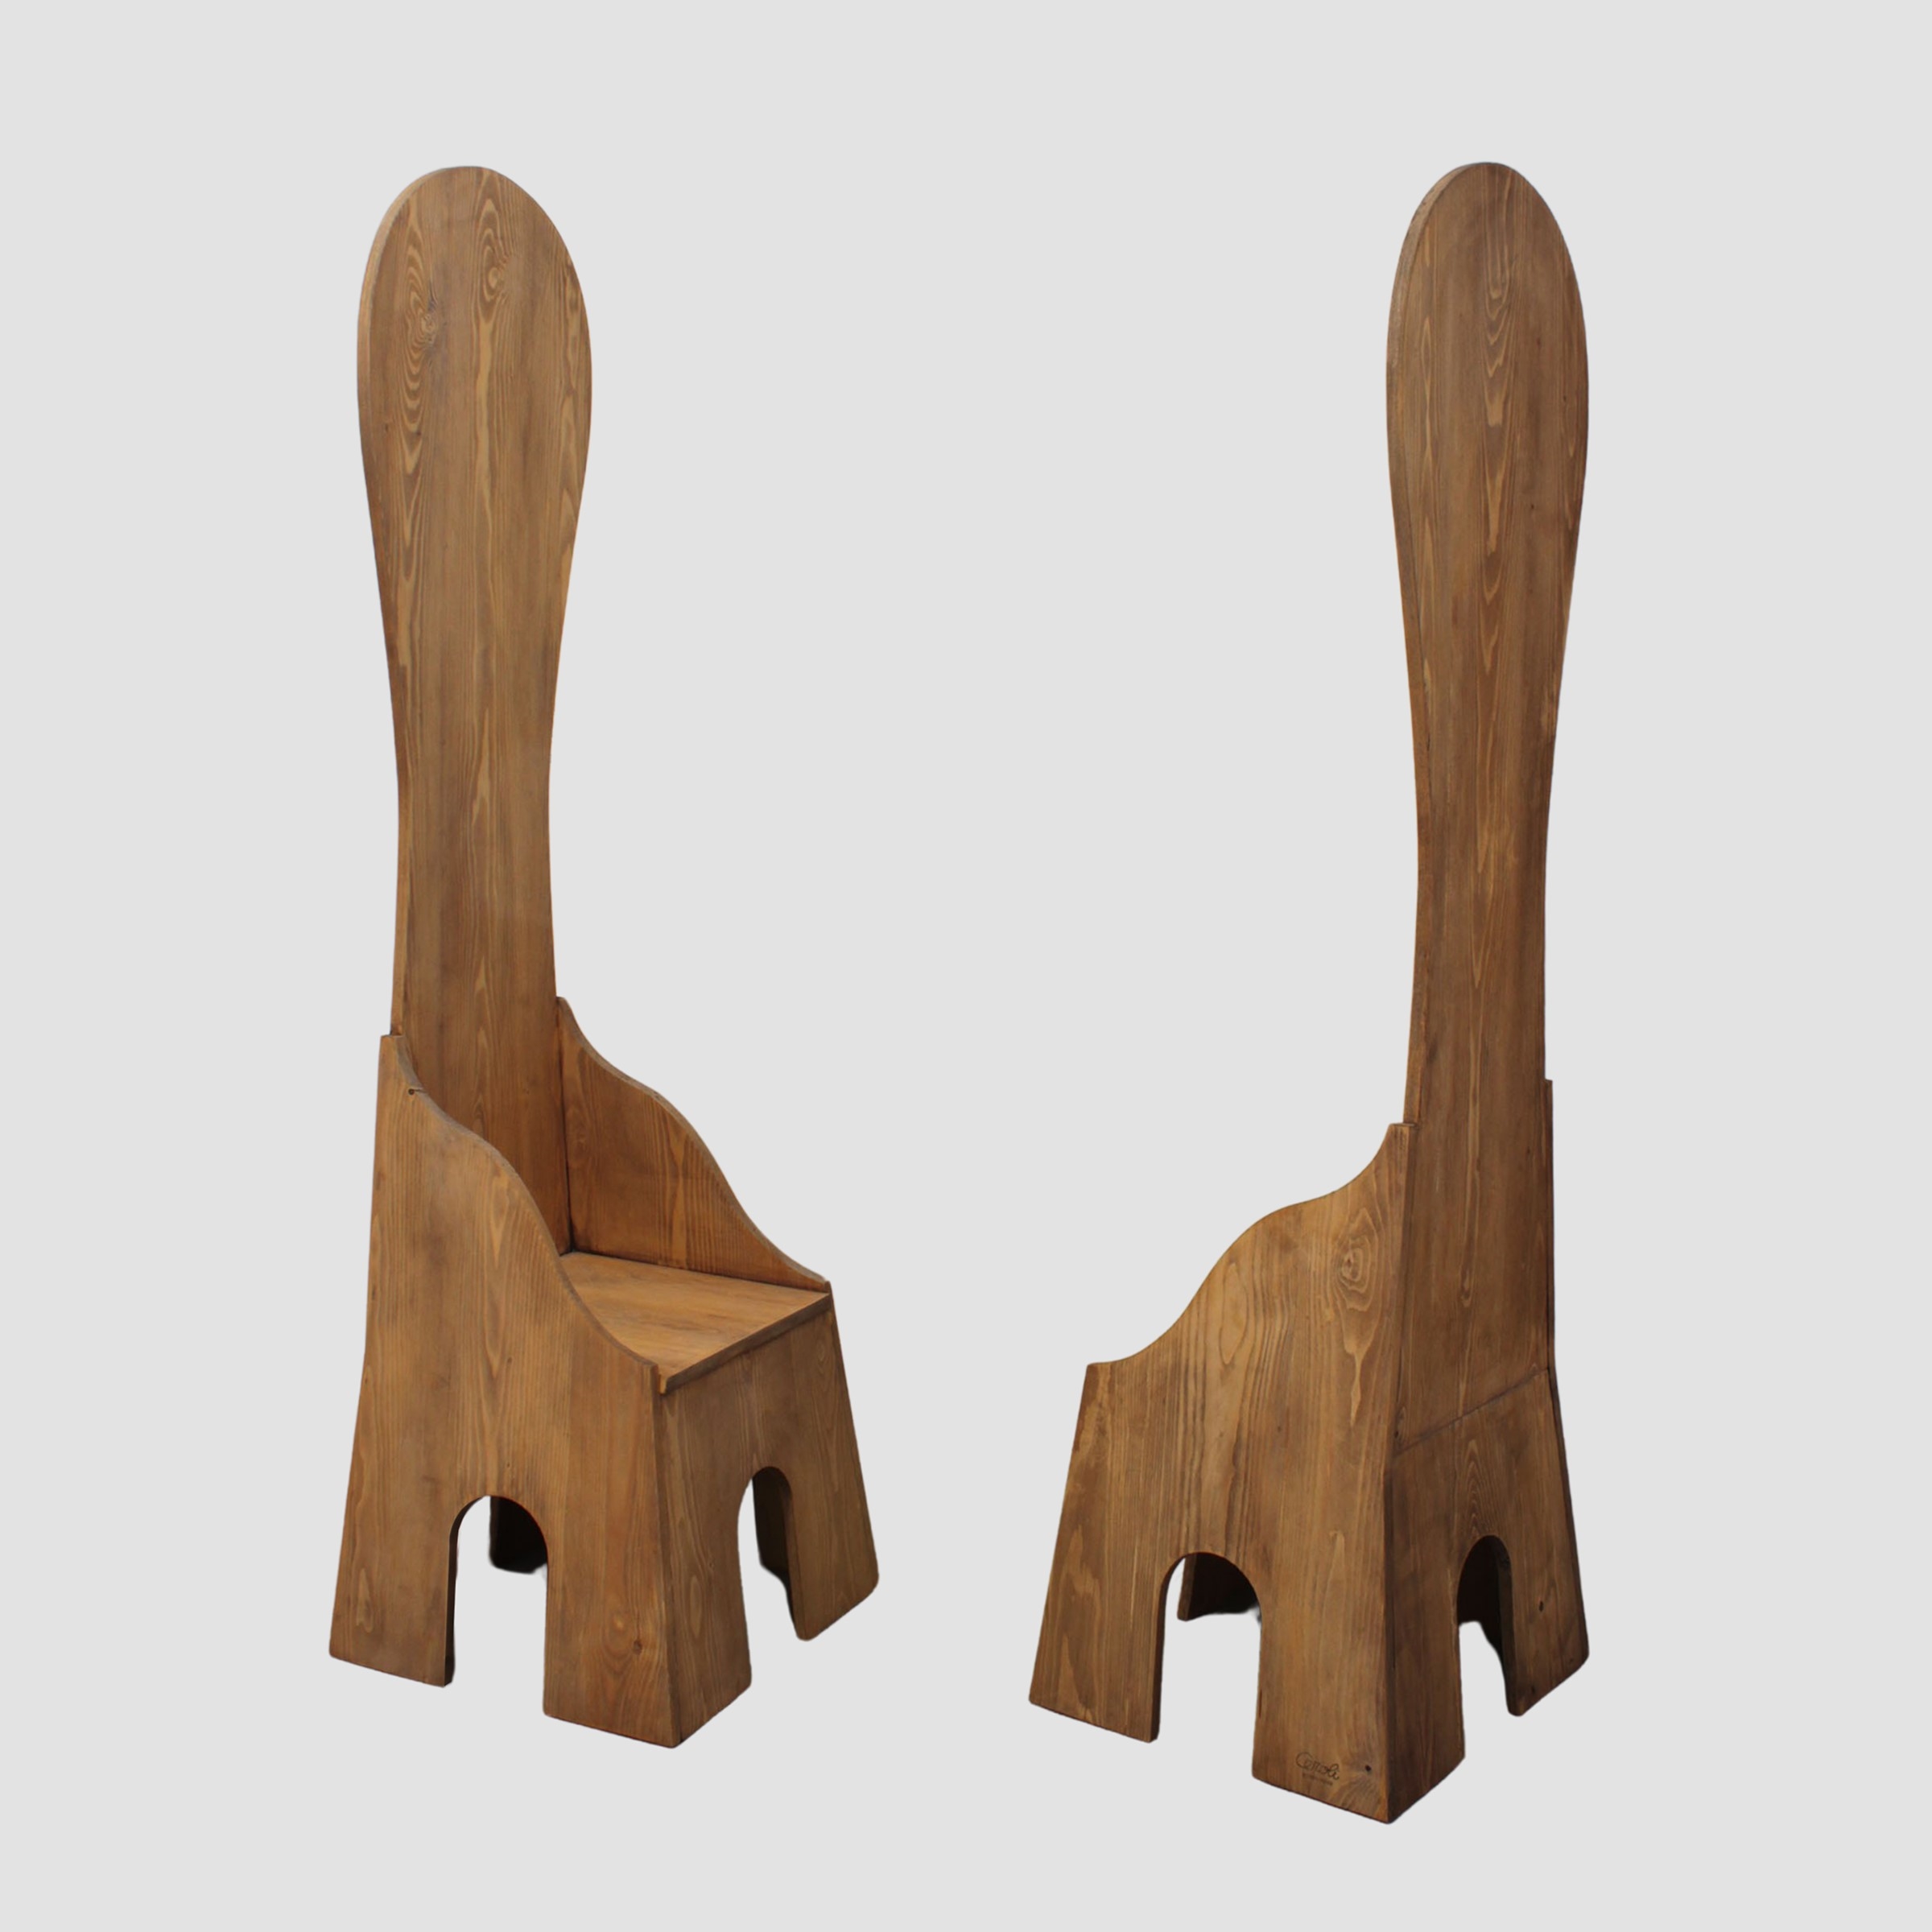 pair of Sedia Alta mod. chairs in in wood by Mario Ceroli, 1972